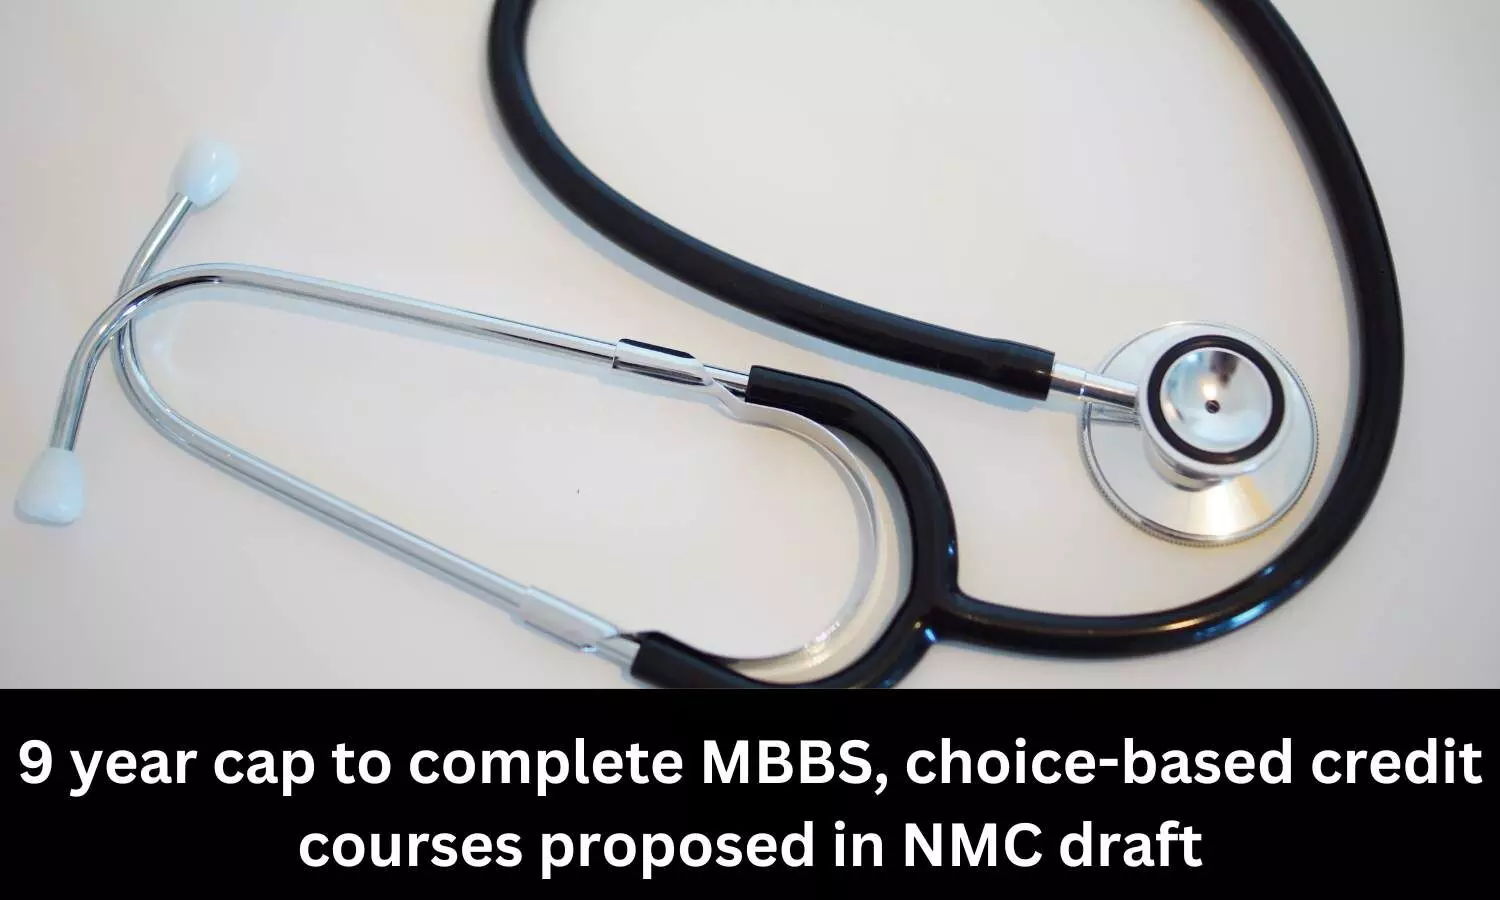 Nine year cap to complete MBBS, choice-based credit courses proposed in NMC draft